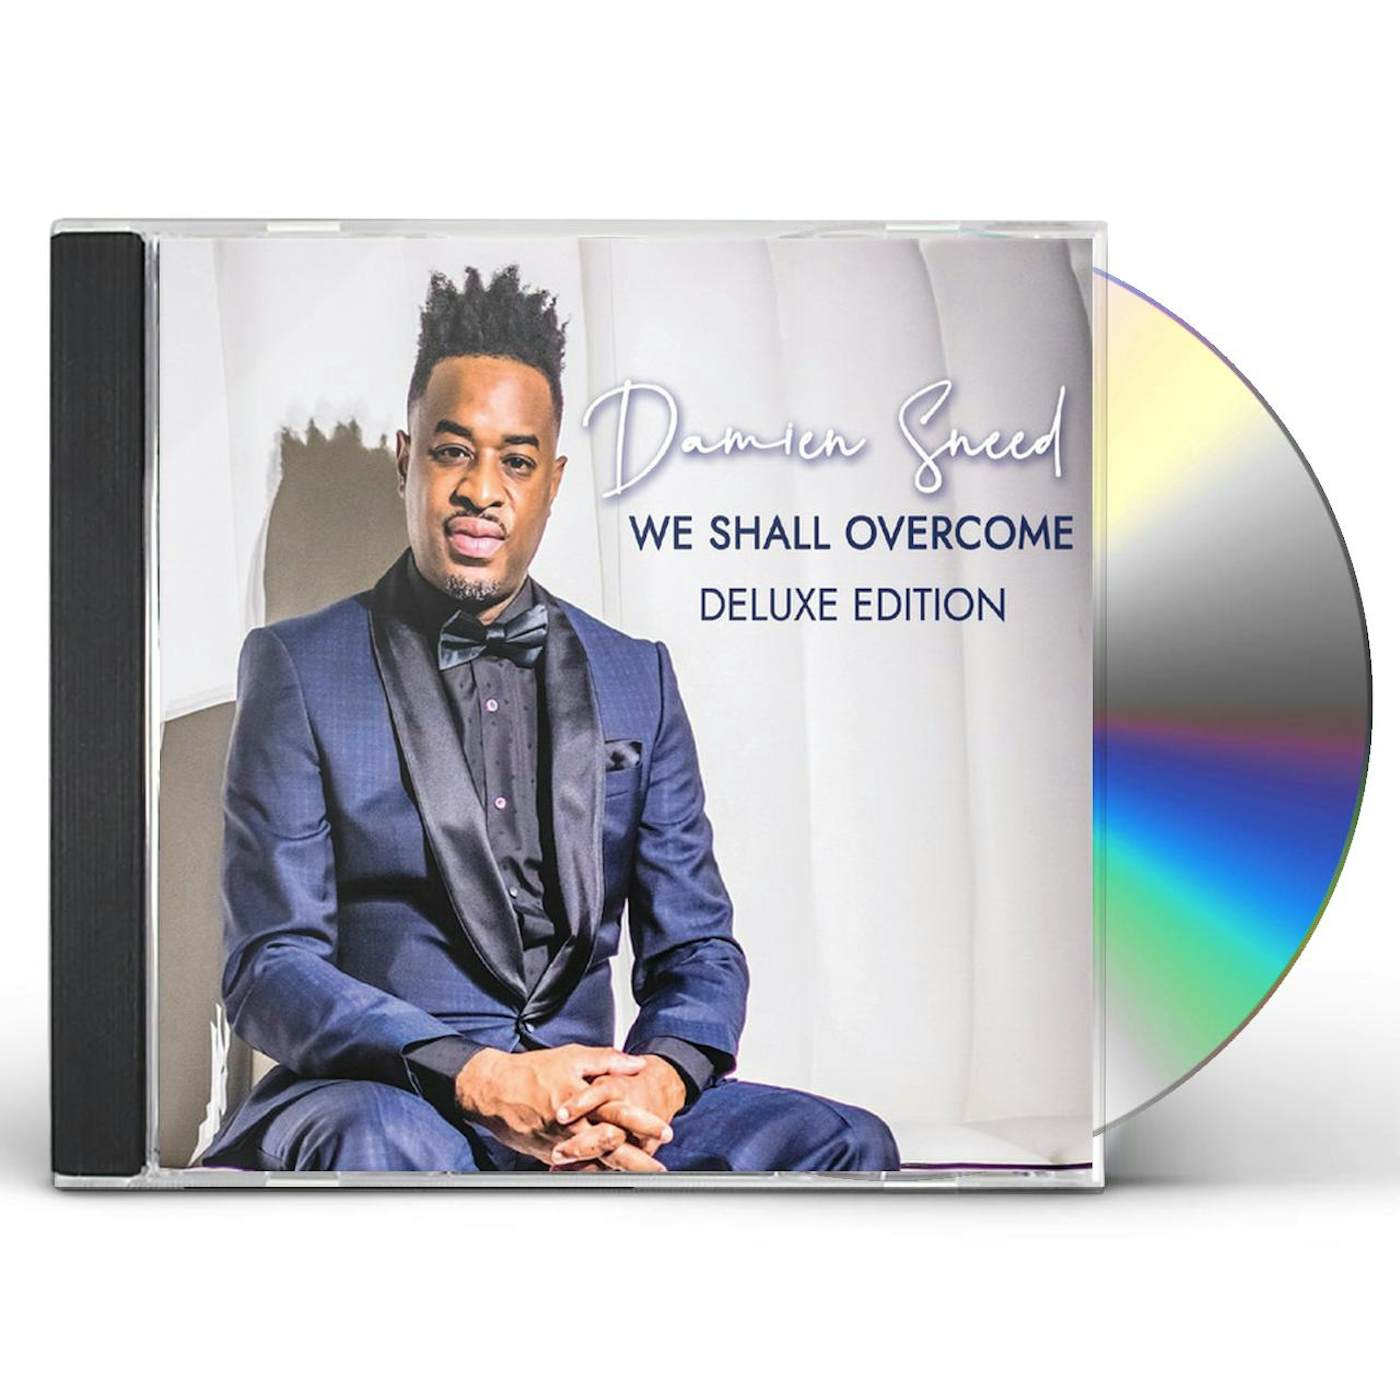 Damien Sneed WE SHALL OVERCOME DELUXE CD